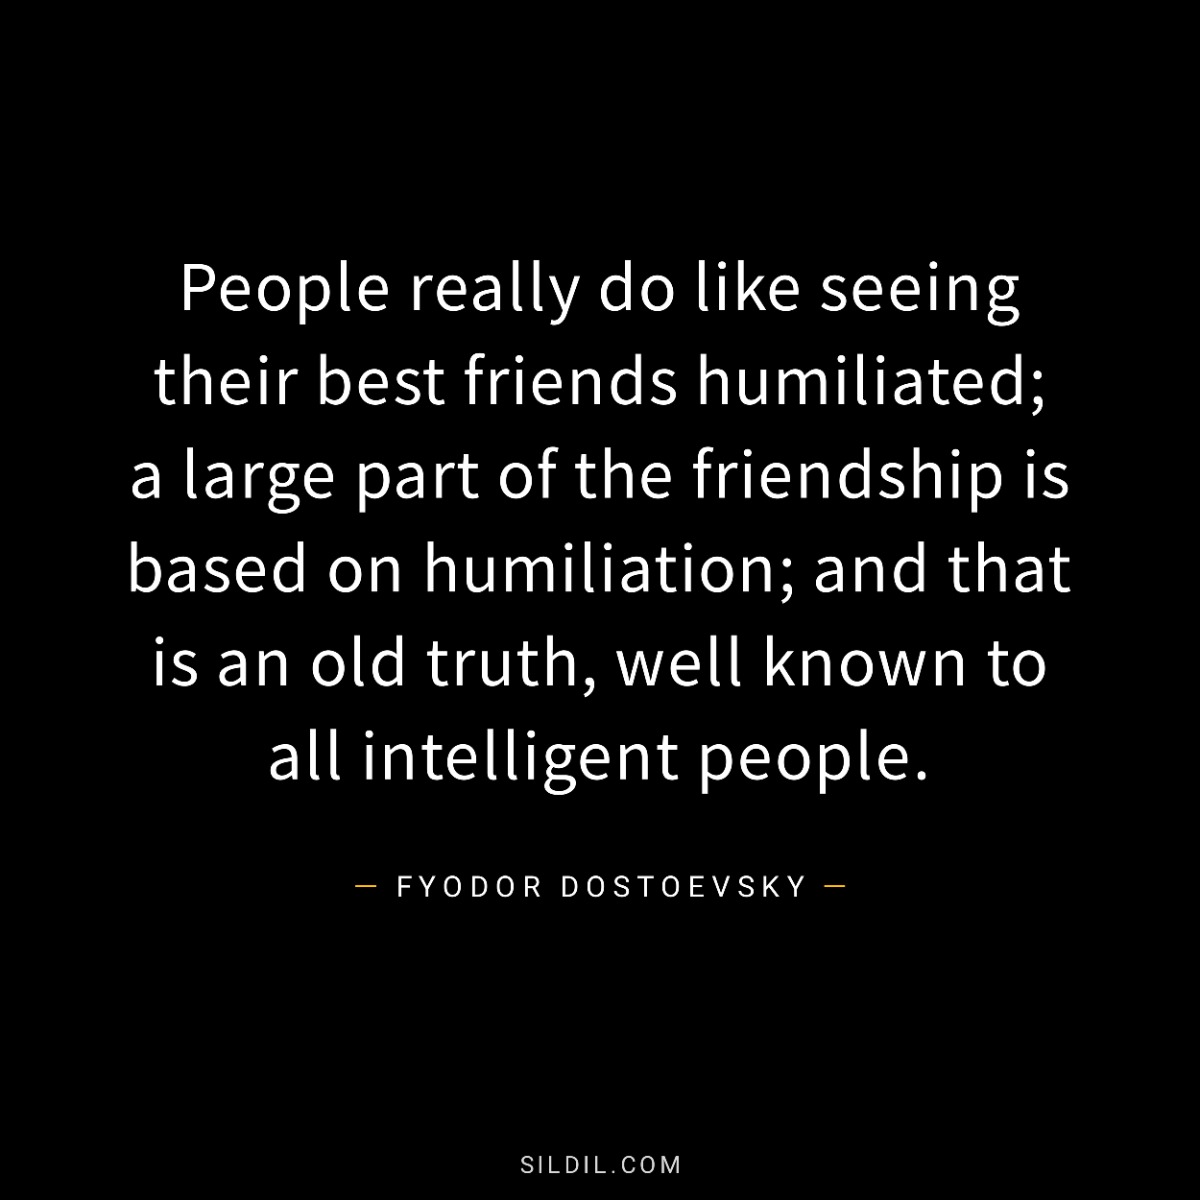 People really do like seeing their best friends humiliated; a large part of the friendship is based on humiliation; and that is an old truth, well known to all intelligent people.